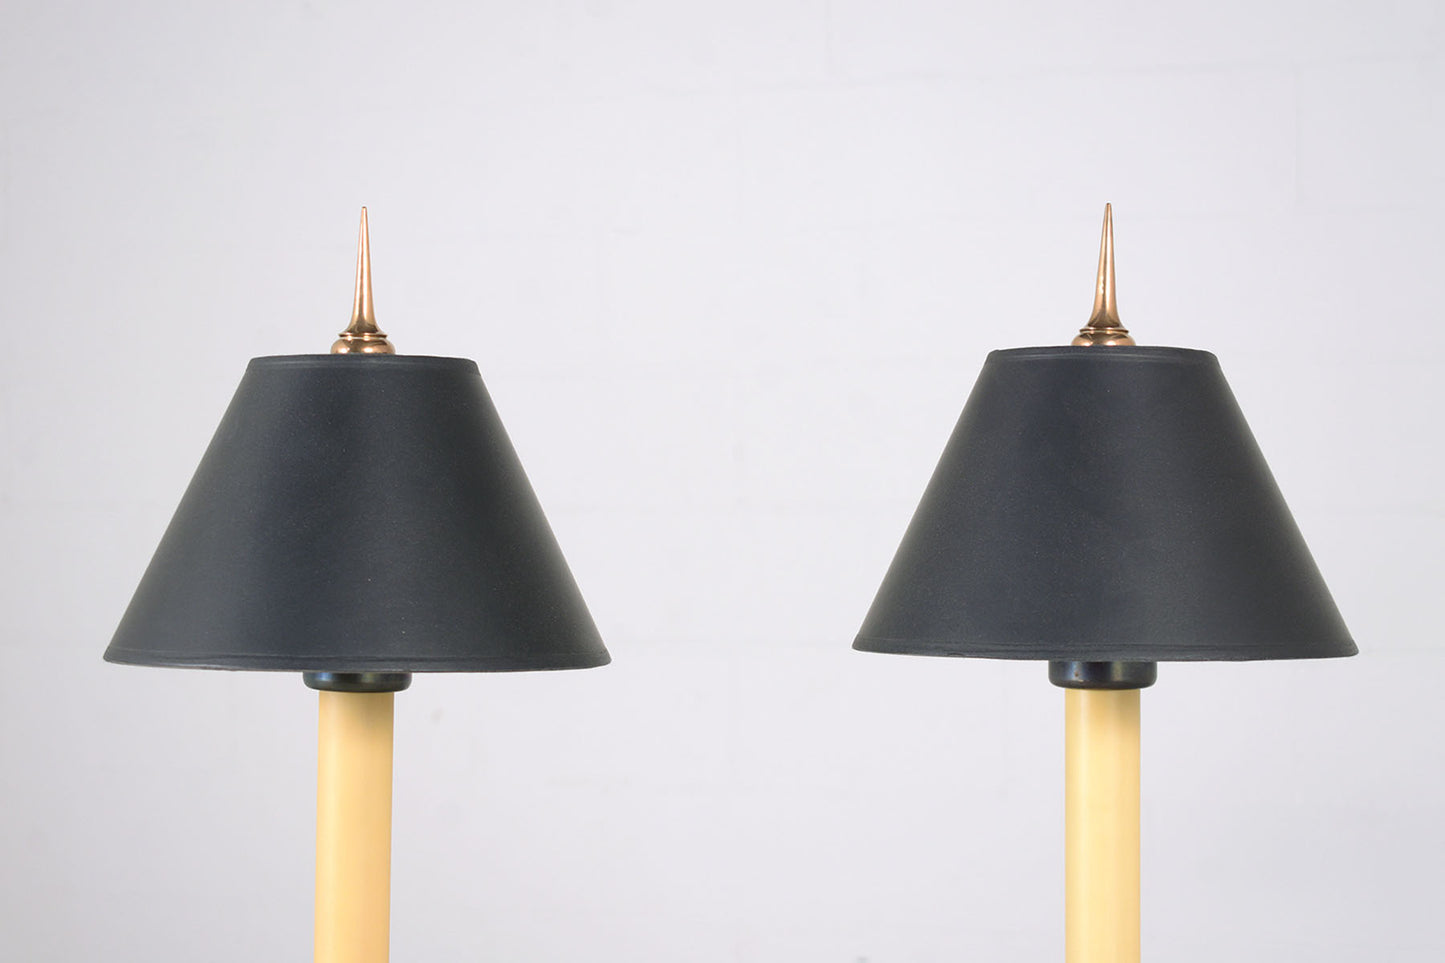 Pair of 1960s Hollywood Regency Style Table Lamps: Vintage Opulence Reimagined